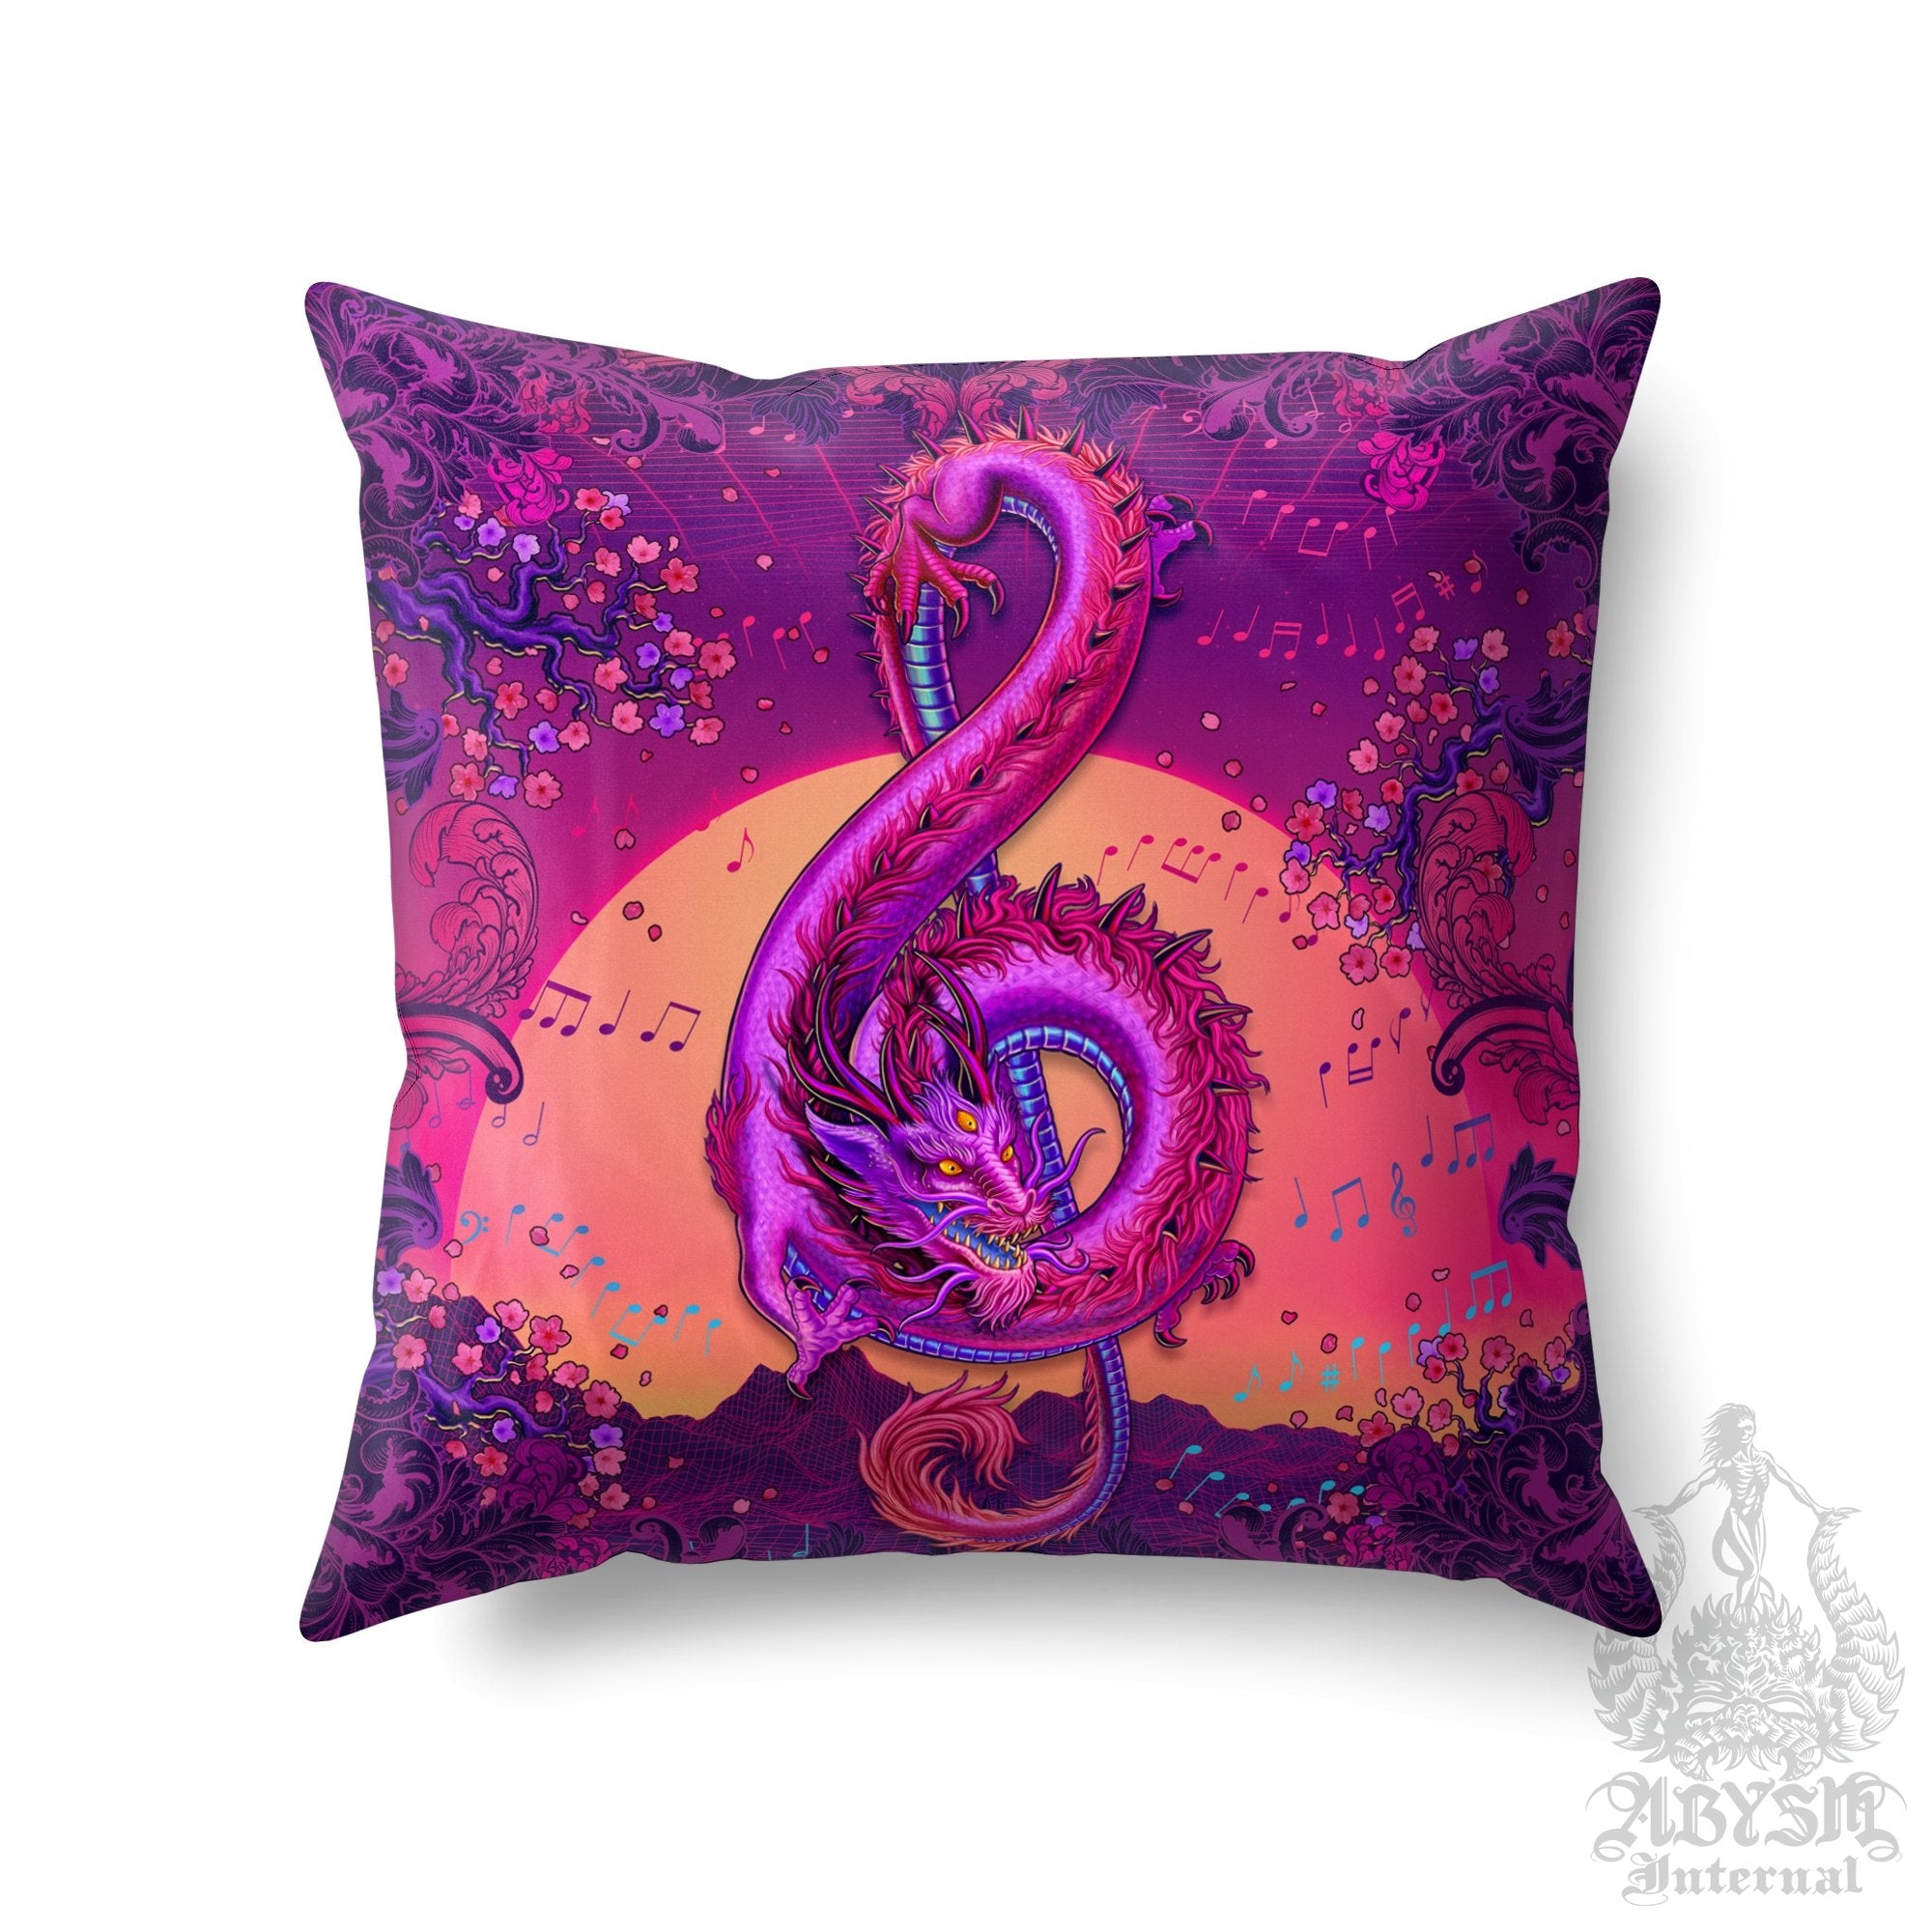 Vaporwave Throw Pillow, Psychedelic Decorative Accent Cushion, Synthwave Home Decor, Retrowave 80s Music Room - Treble Clef Dragon - Abysm Internal